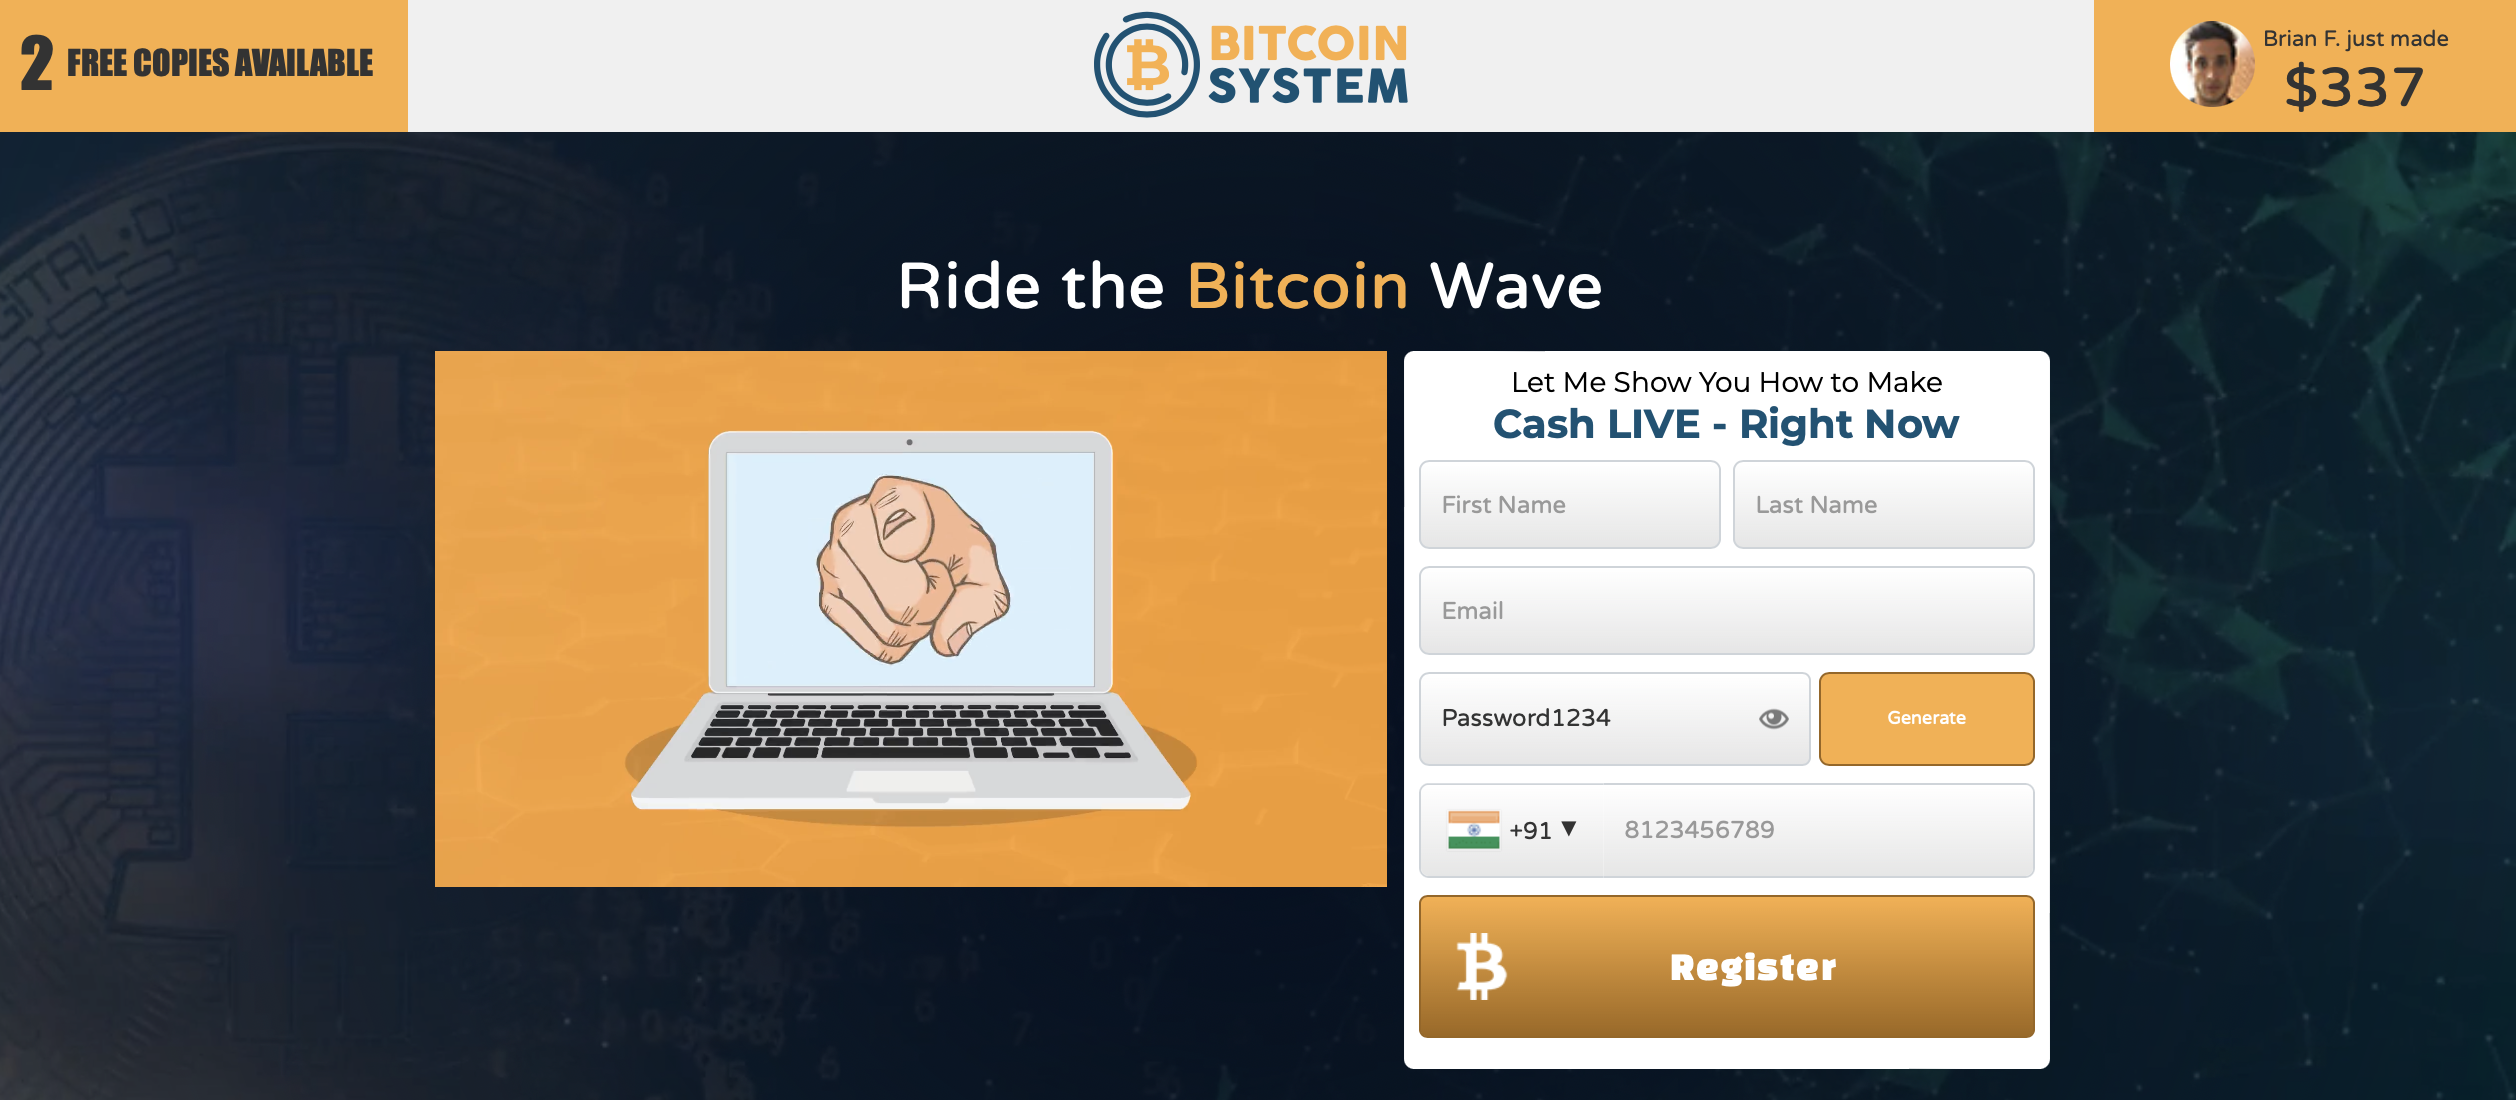 The official website of the Bitcoin System